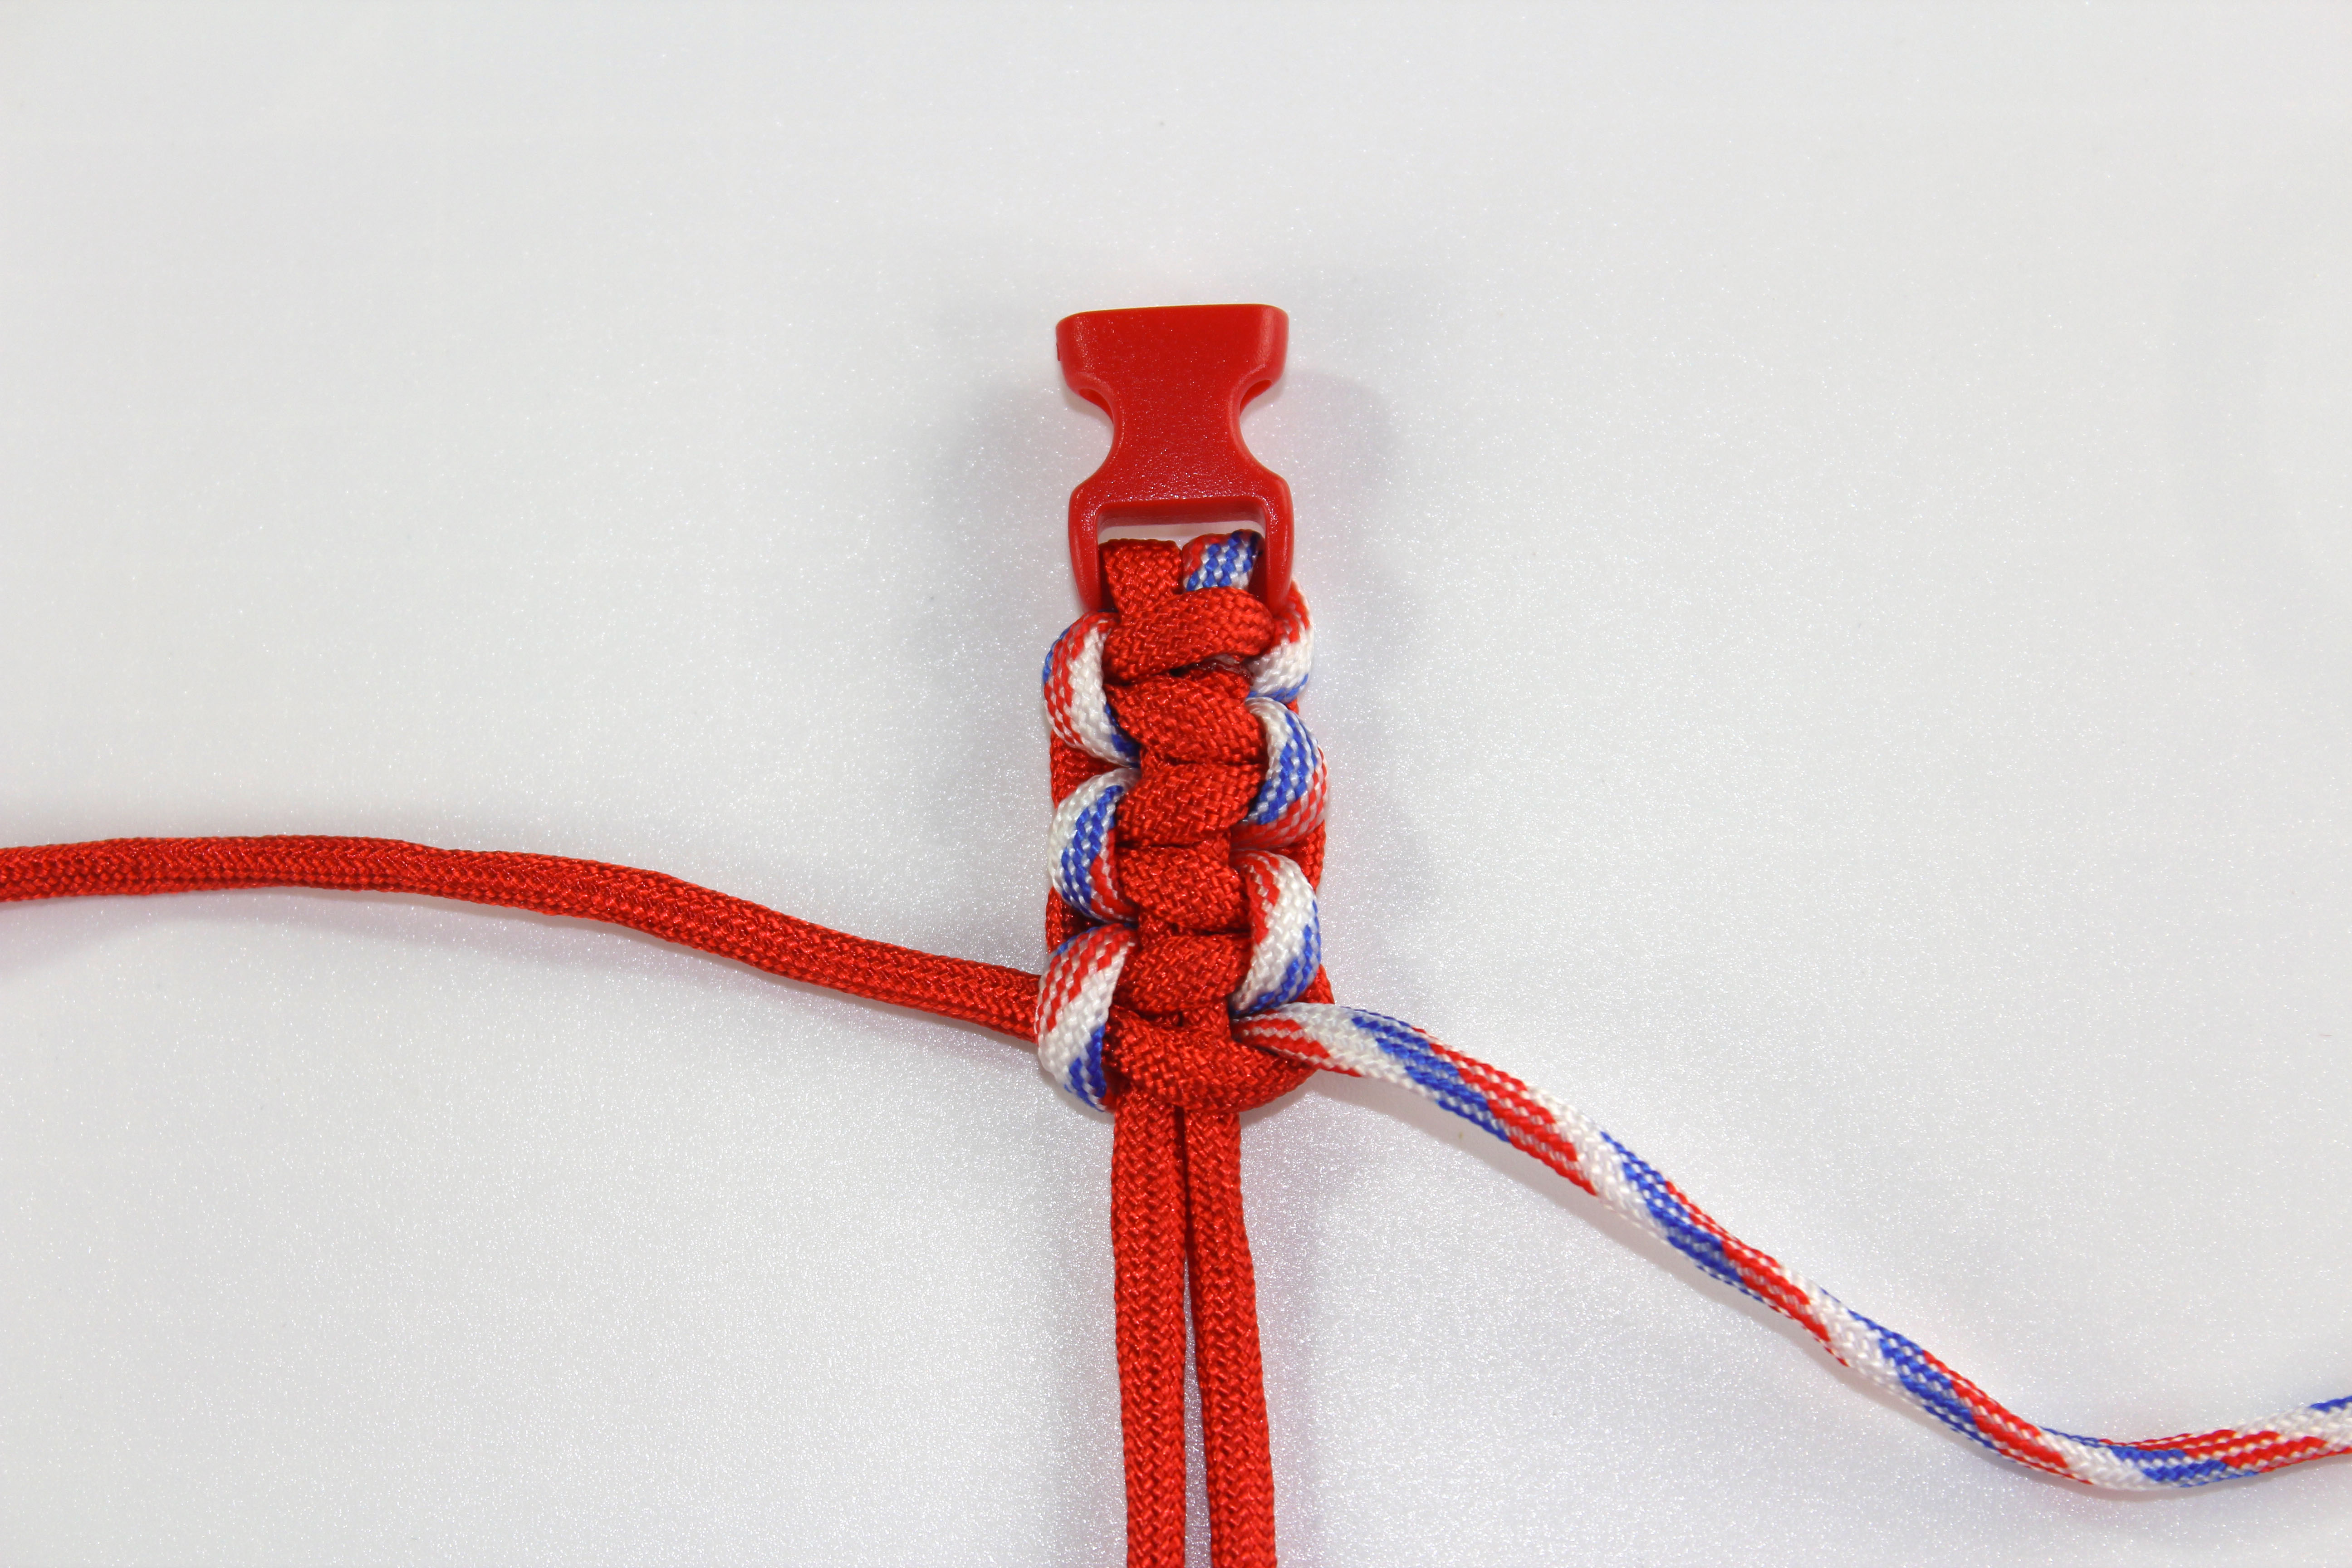 How to make a paracord bracelet with two colours - step 12a